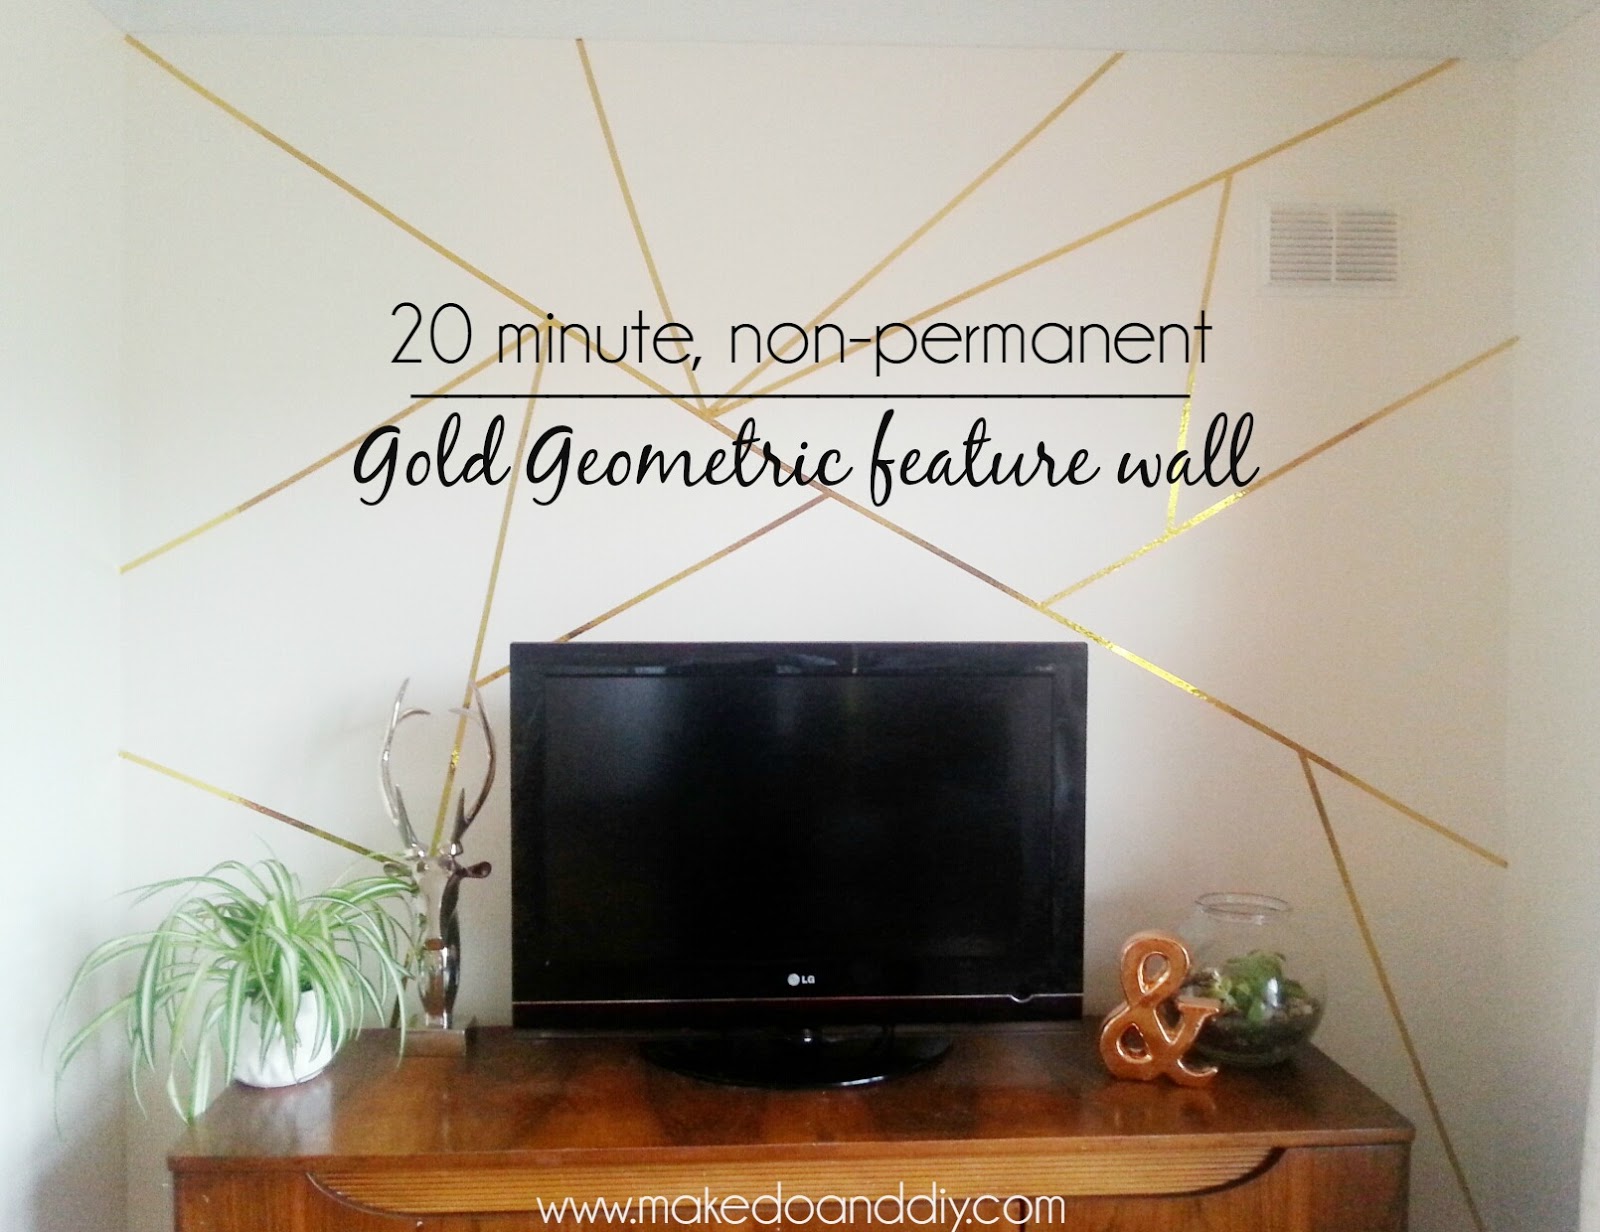 How To Create A Gold Geometric Feature Wall In 20 Minutes And It S Removable Make Do And Diy,Interior 3d Architecture Design